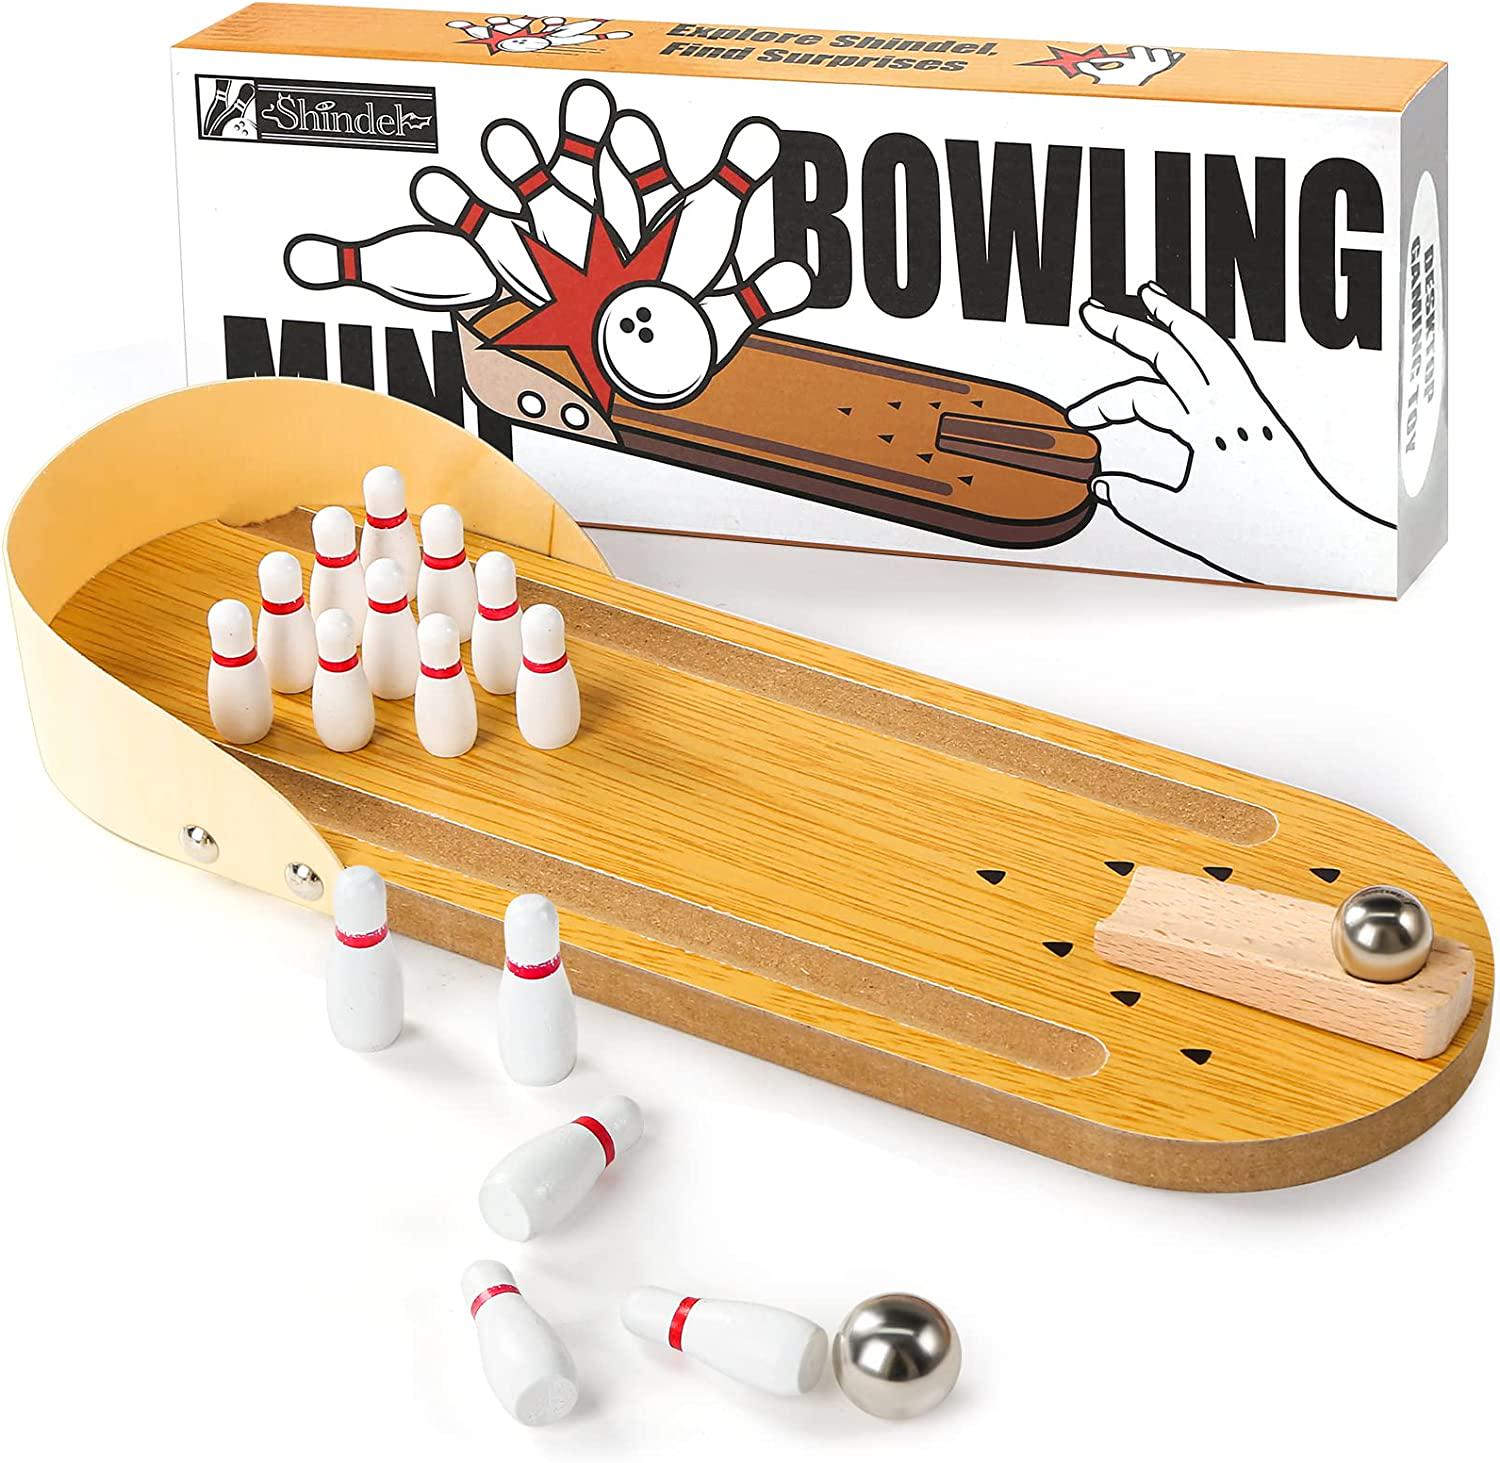 Shindel, Mini Bowling Game Mini Wooden Desktop Bowling Game Mini Tabletop Bowling Toy Classic Desk Ball for Kids and Adults